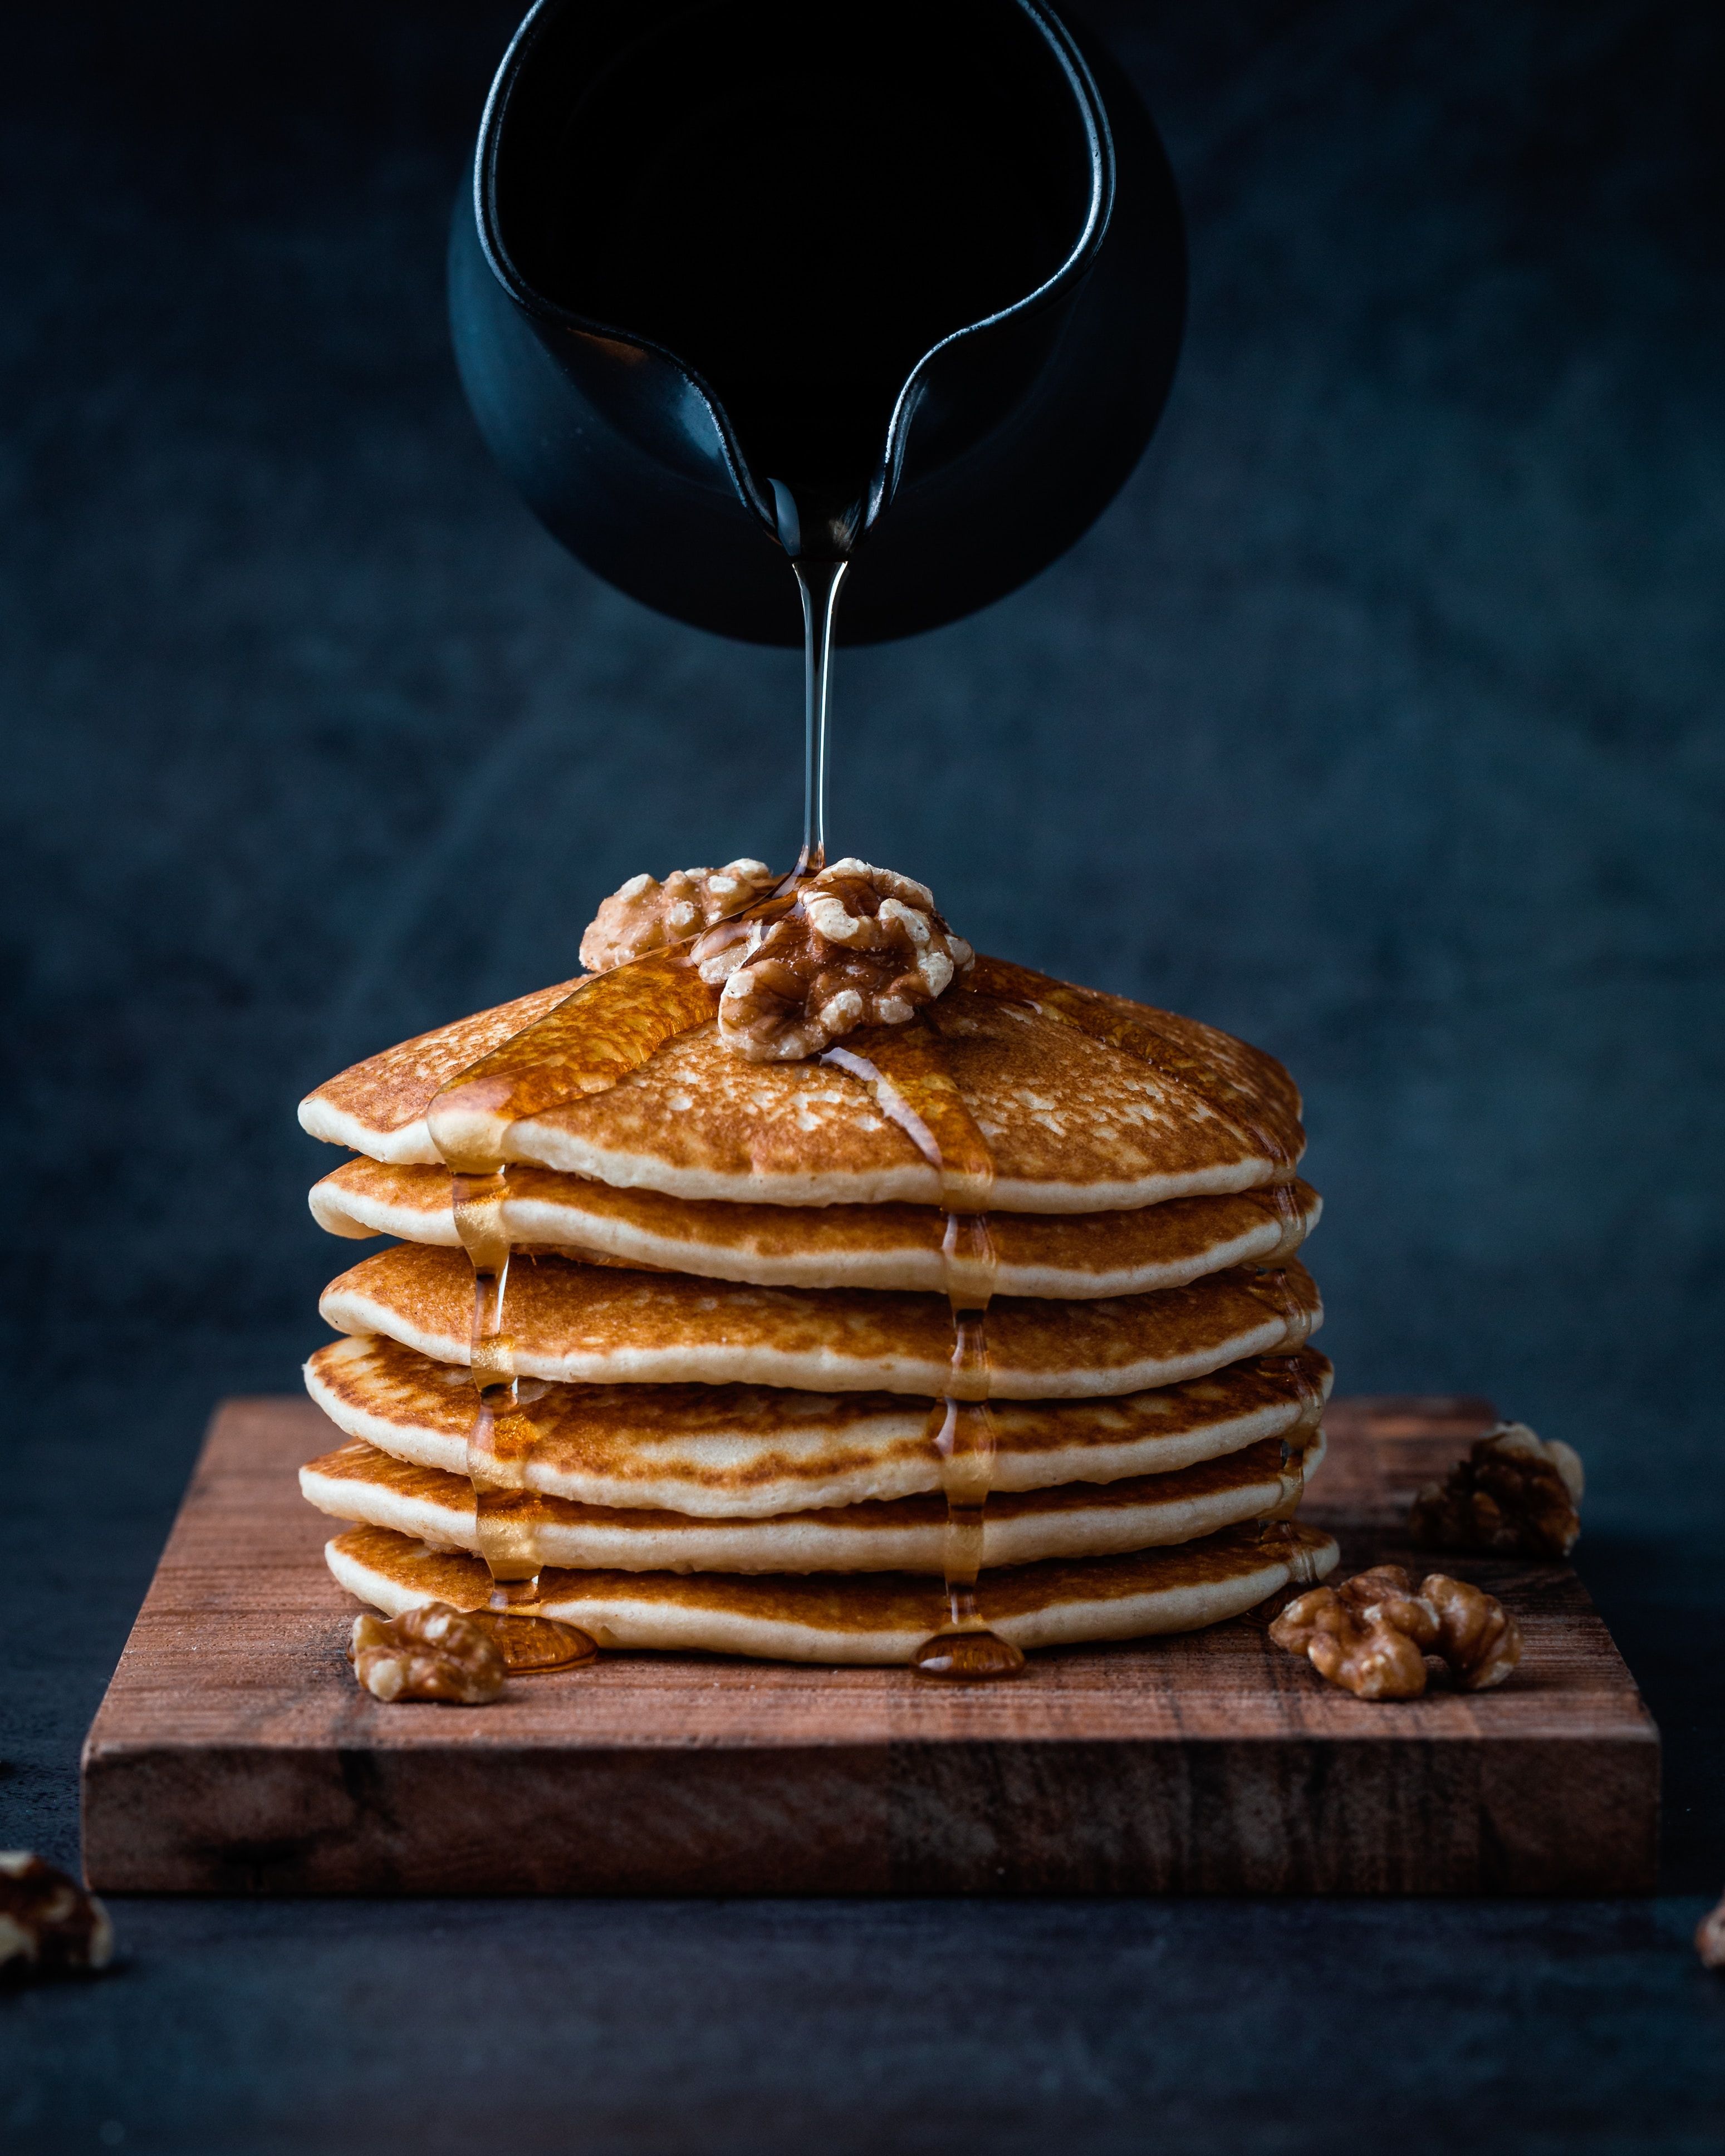 Maple syrup being poured onto Oat Banana pancakes